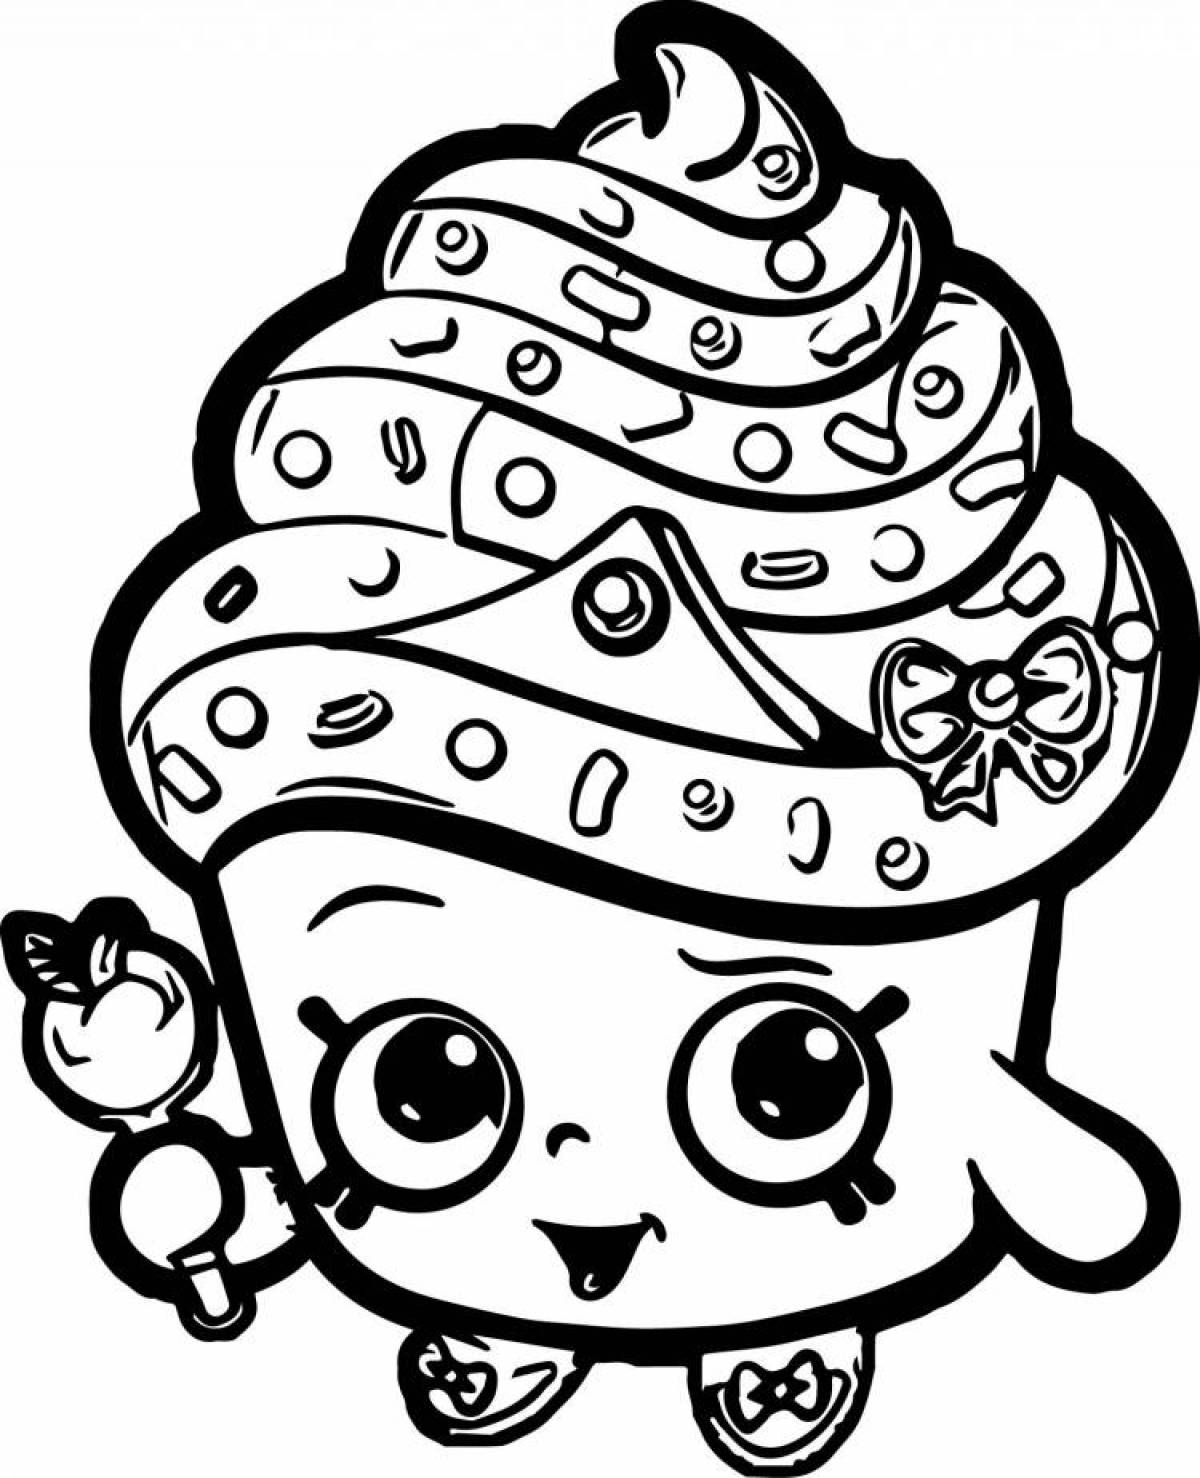 Playful shopkins coloring page